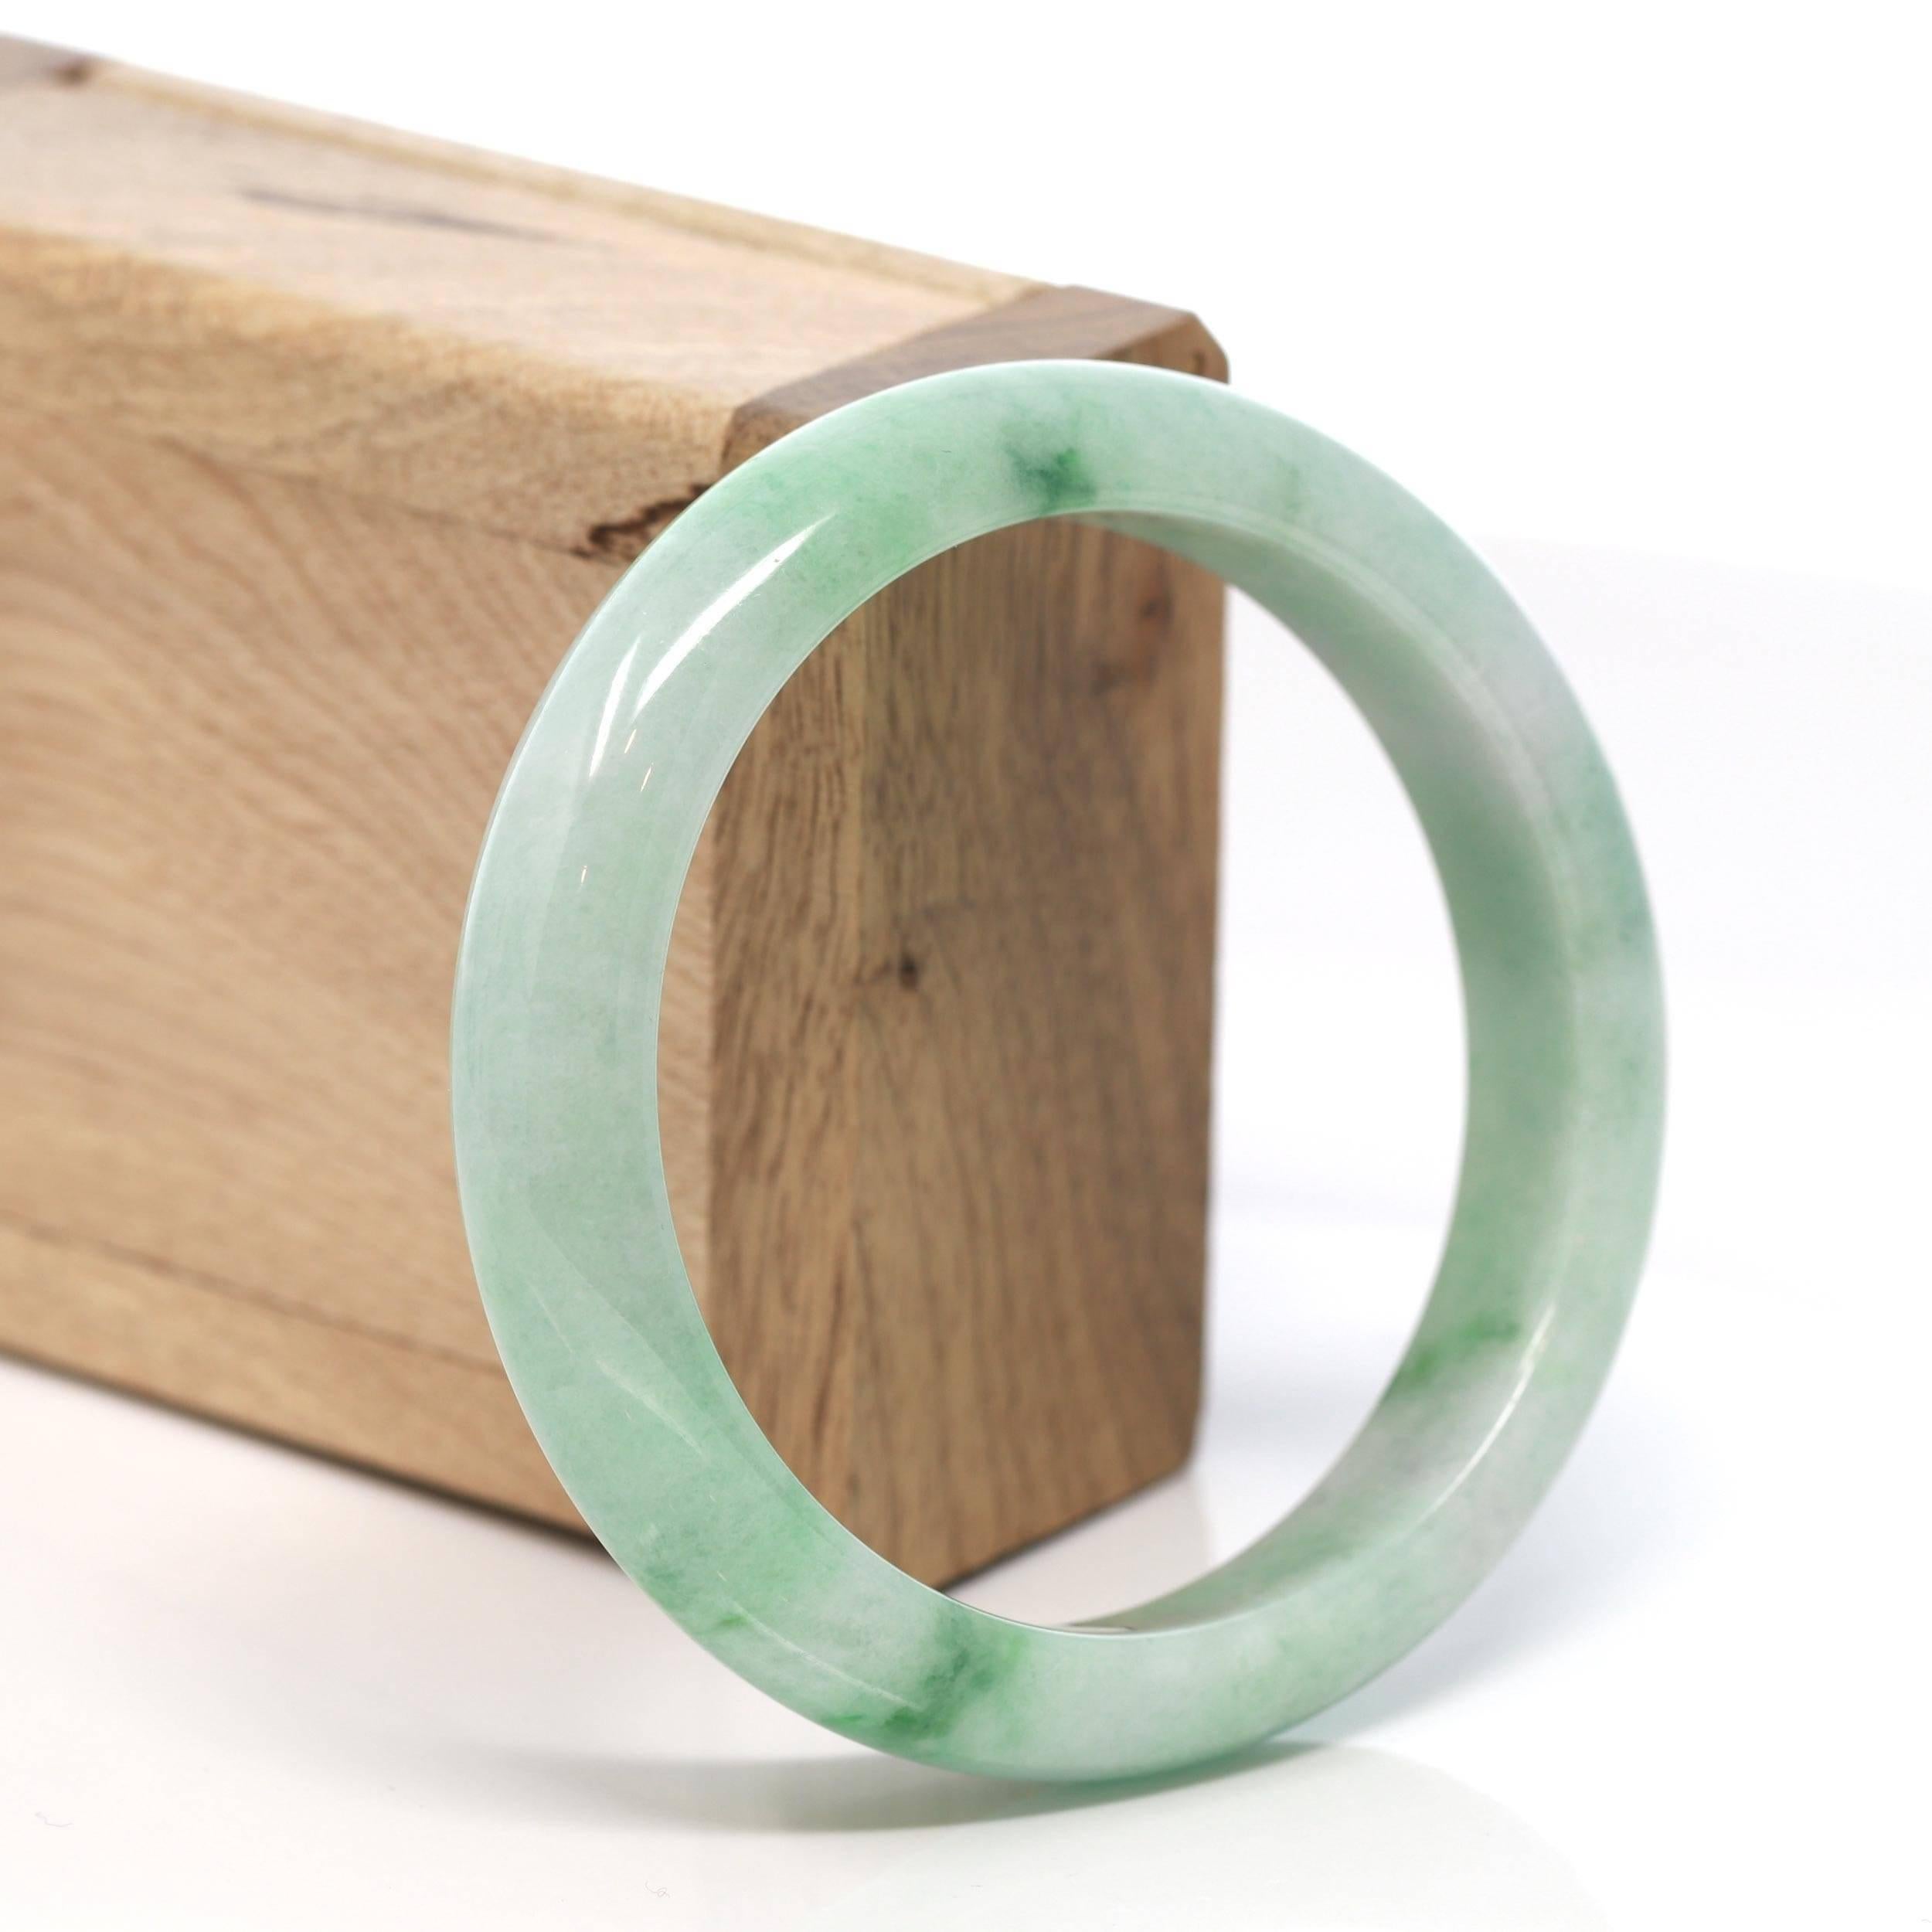  * DETAILS--- Green Genuine Burmese Jadeite Jade Bangle Bracelet.  All Real Jade Jewelry's Jade Bangles are guaranteed to be untreated. The jade texture is fine with an even striking green color throughout. The texture is smooth and fine. With